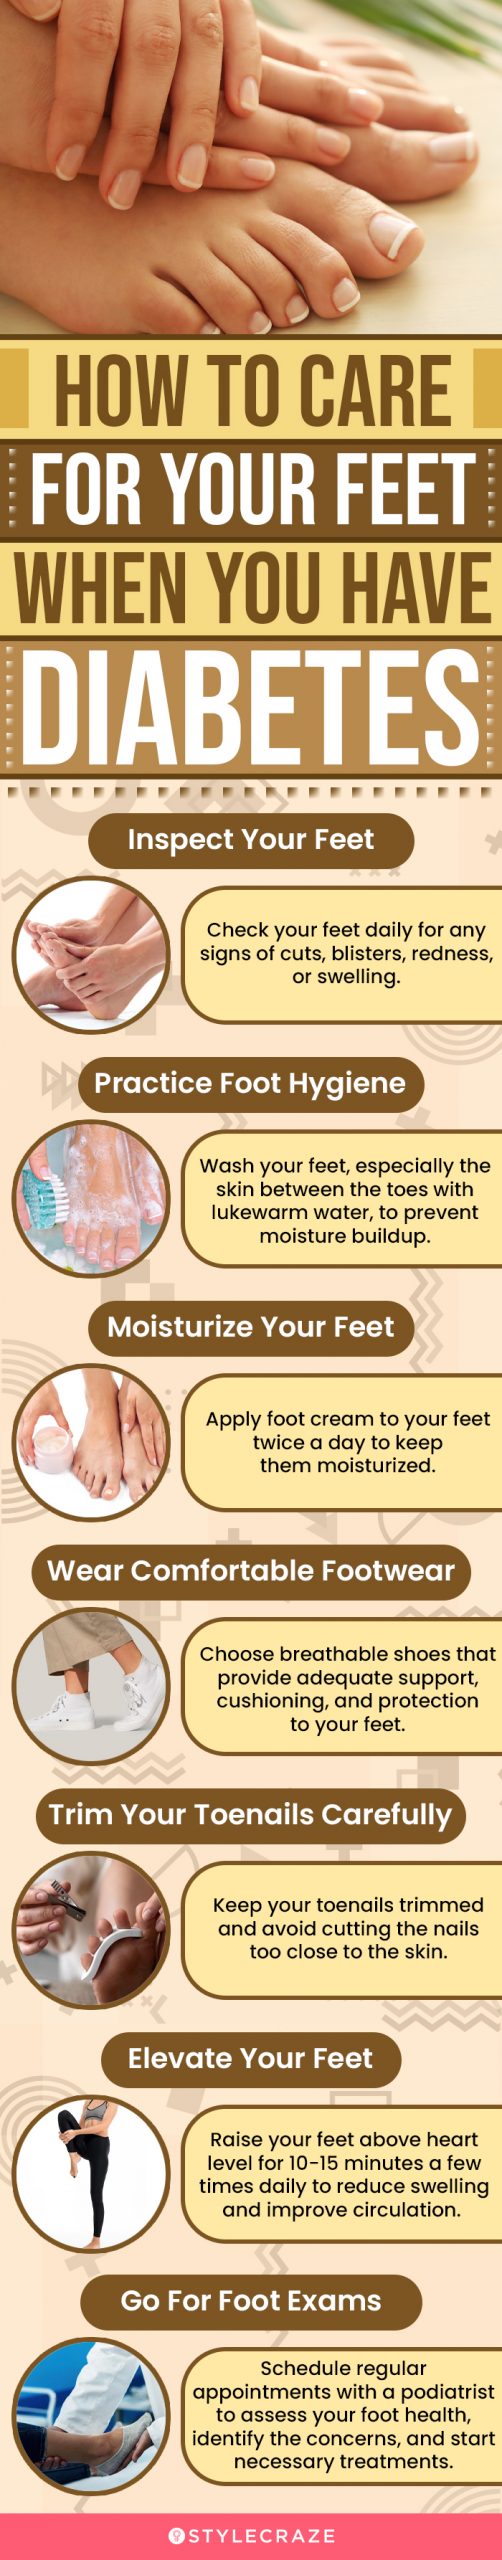 Diabetic Foot Care Tips (infographic)